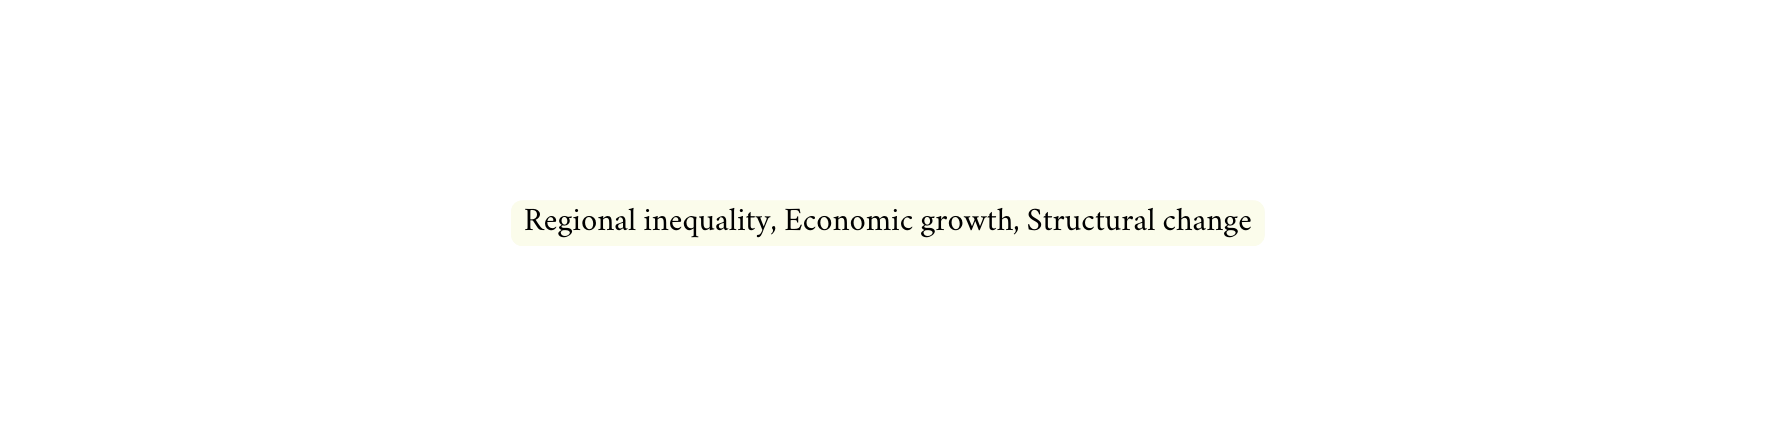 Regional inequality Economic growth Structural change